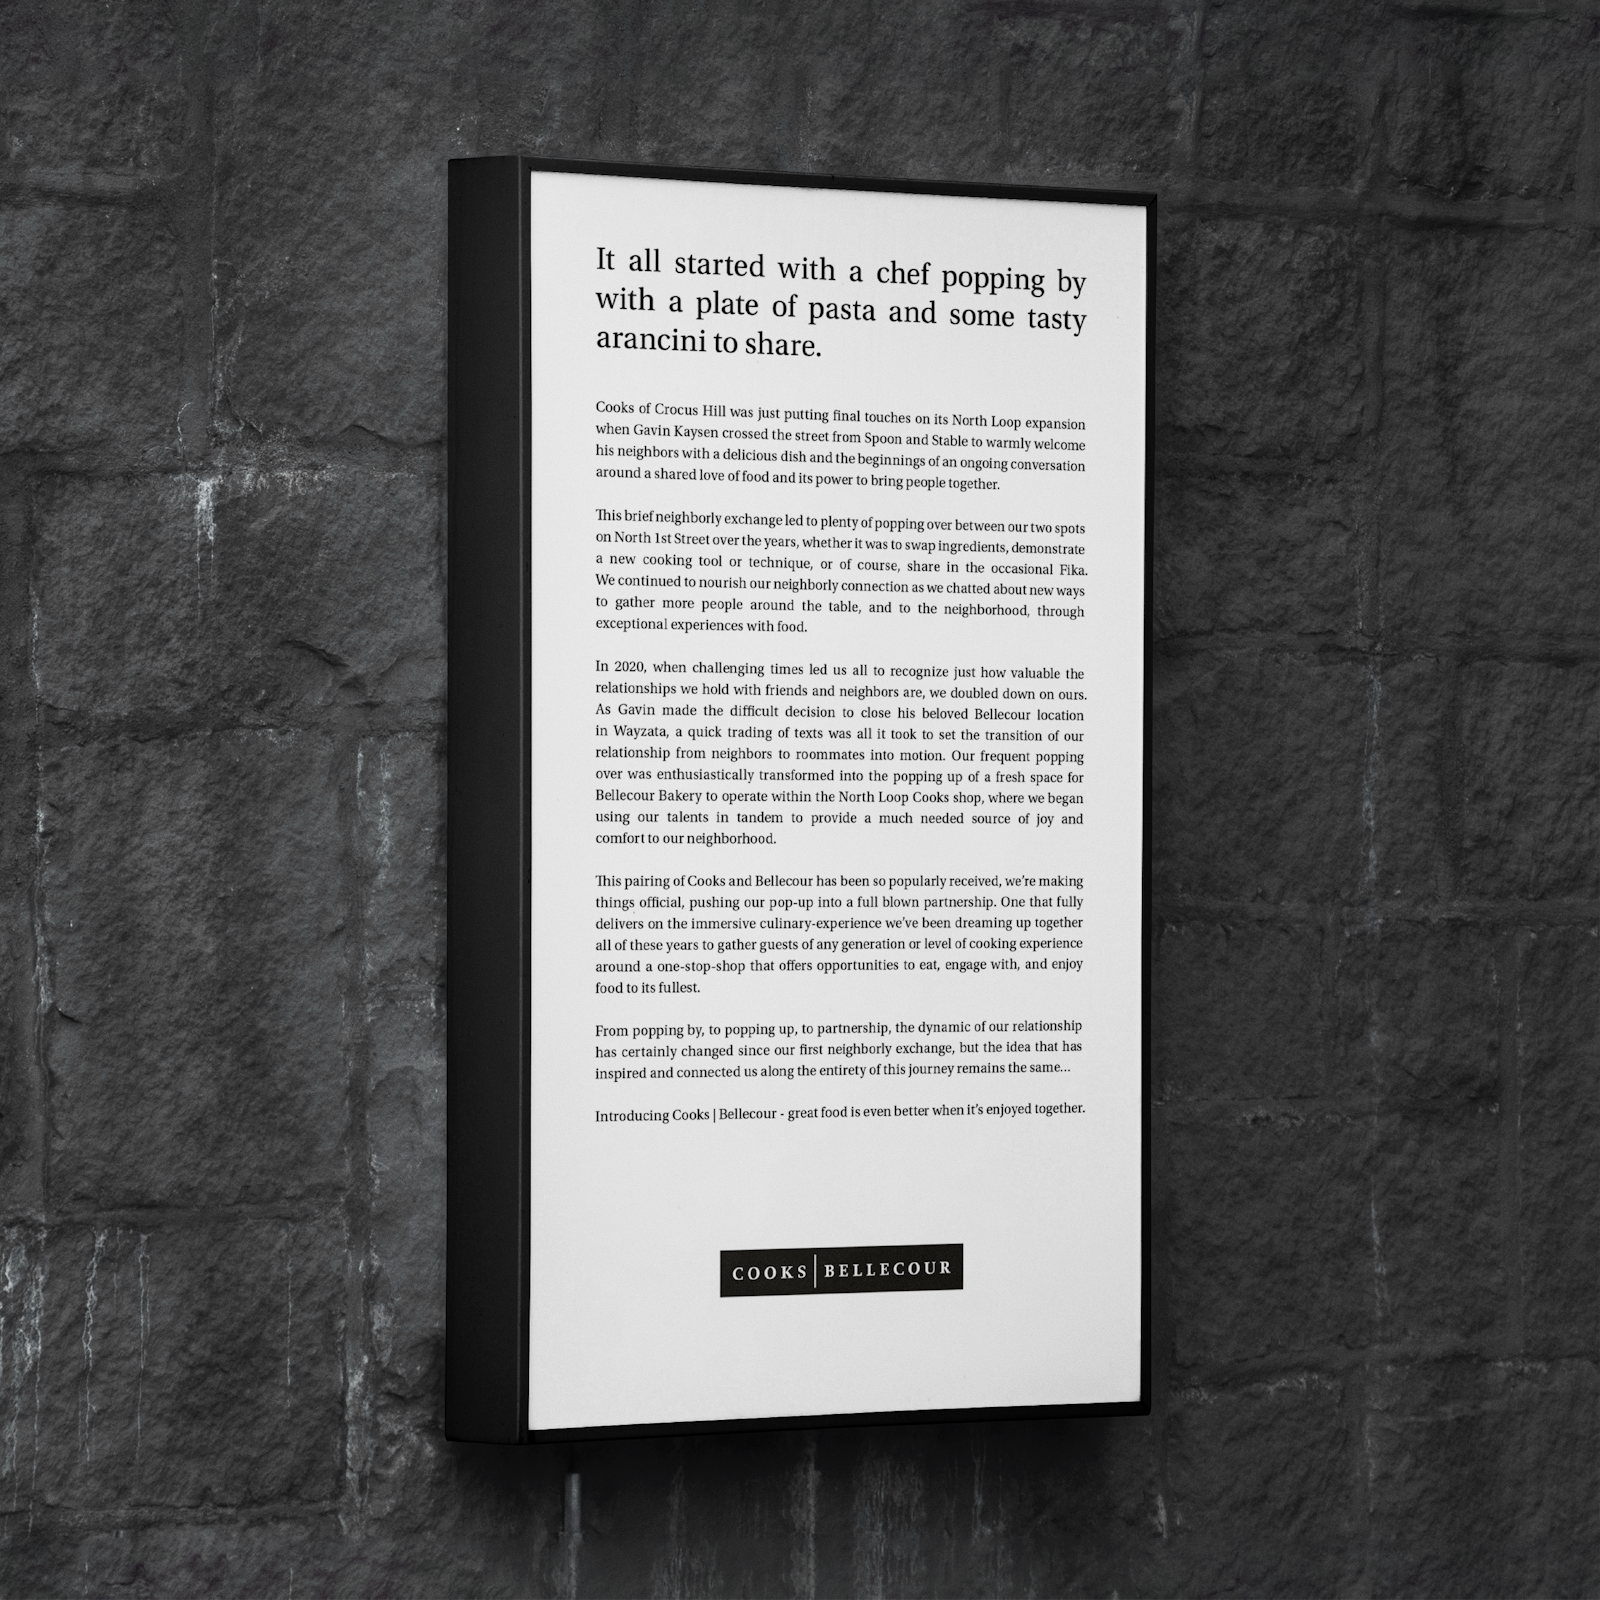 Graphic signage for Cooks | Bellecour story and messaging.